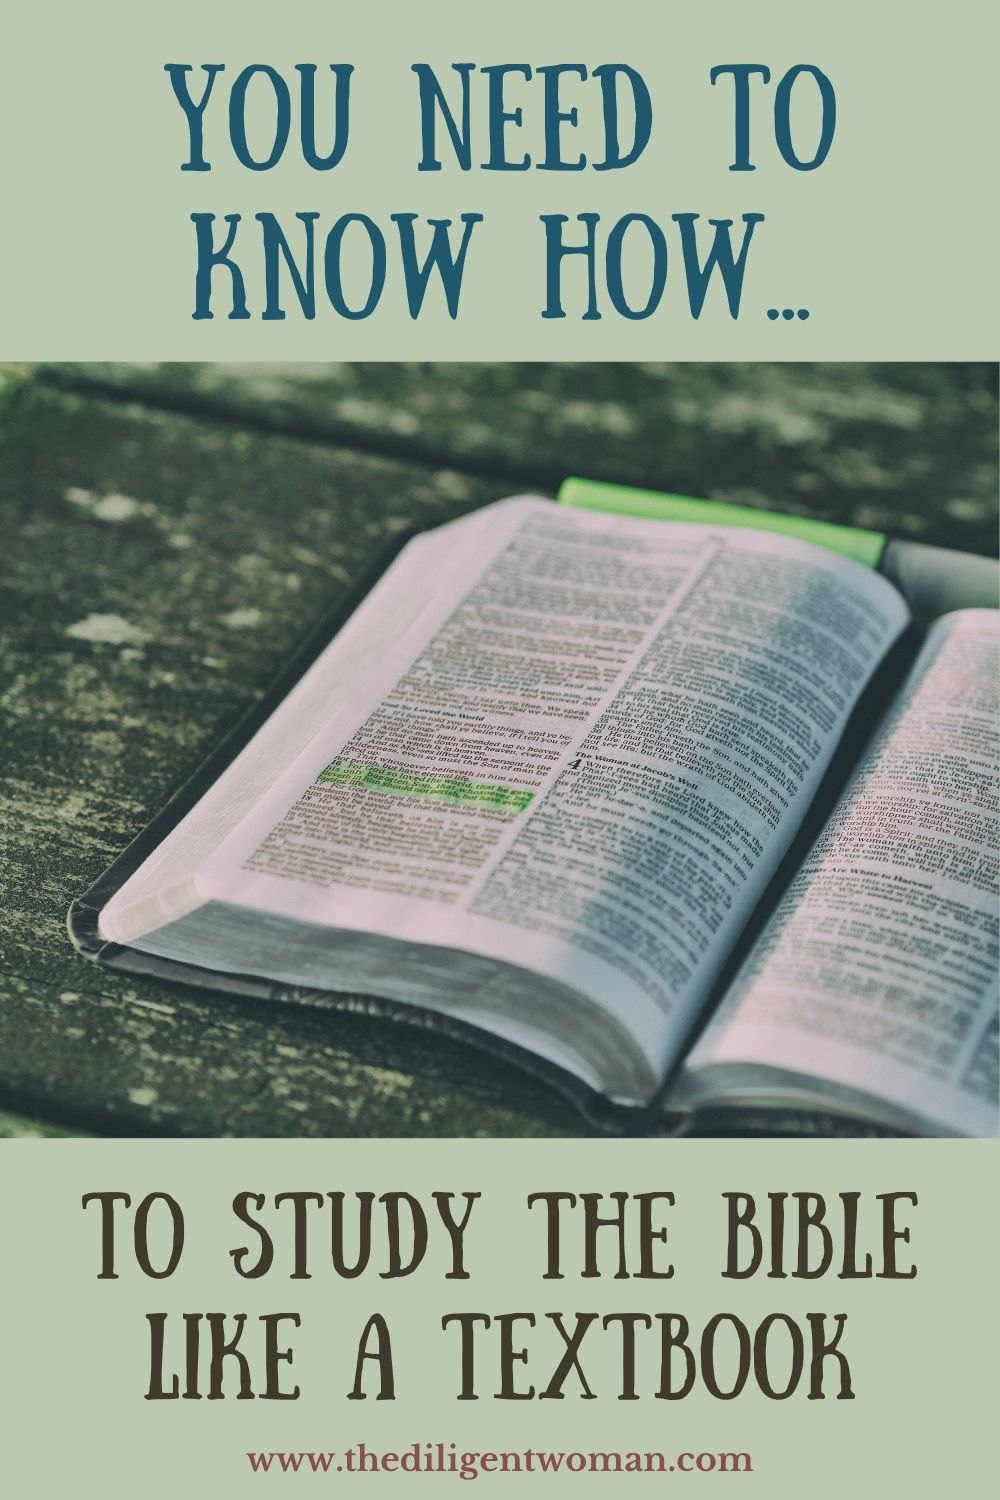 How to Study the Bible with a Bible Marking System